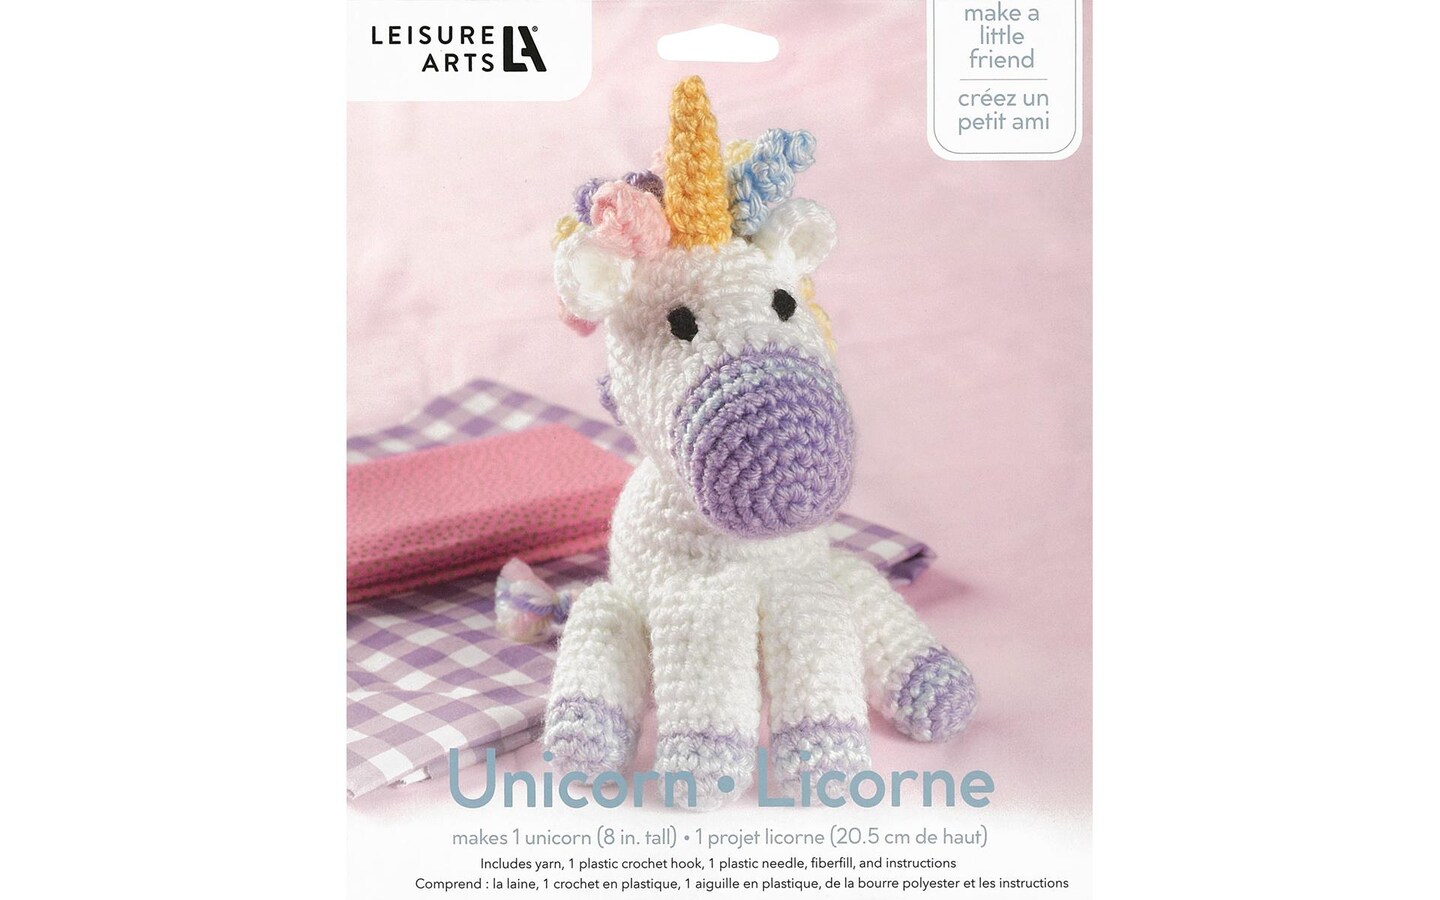 Leisure Arts Little Crochet Friend Animals Crochet Kit, Pig, 8, Complete Crochet  kit, Learn to Crochet Animal Starter kit for All Ages, Includes  Instructions, DIY amigurumi Crochet Kits